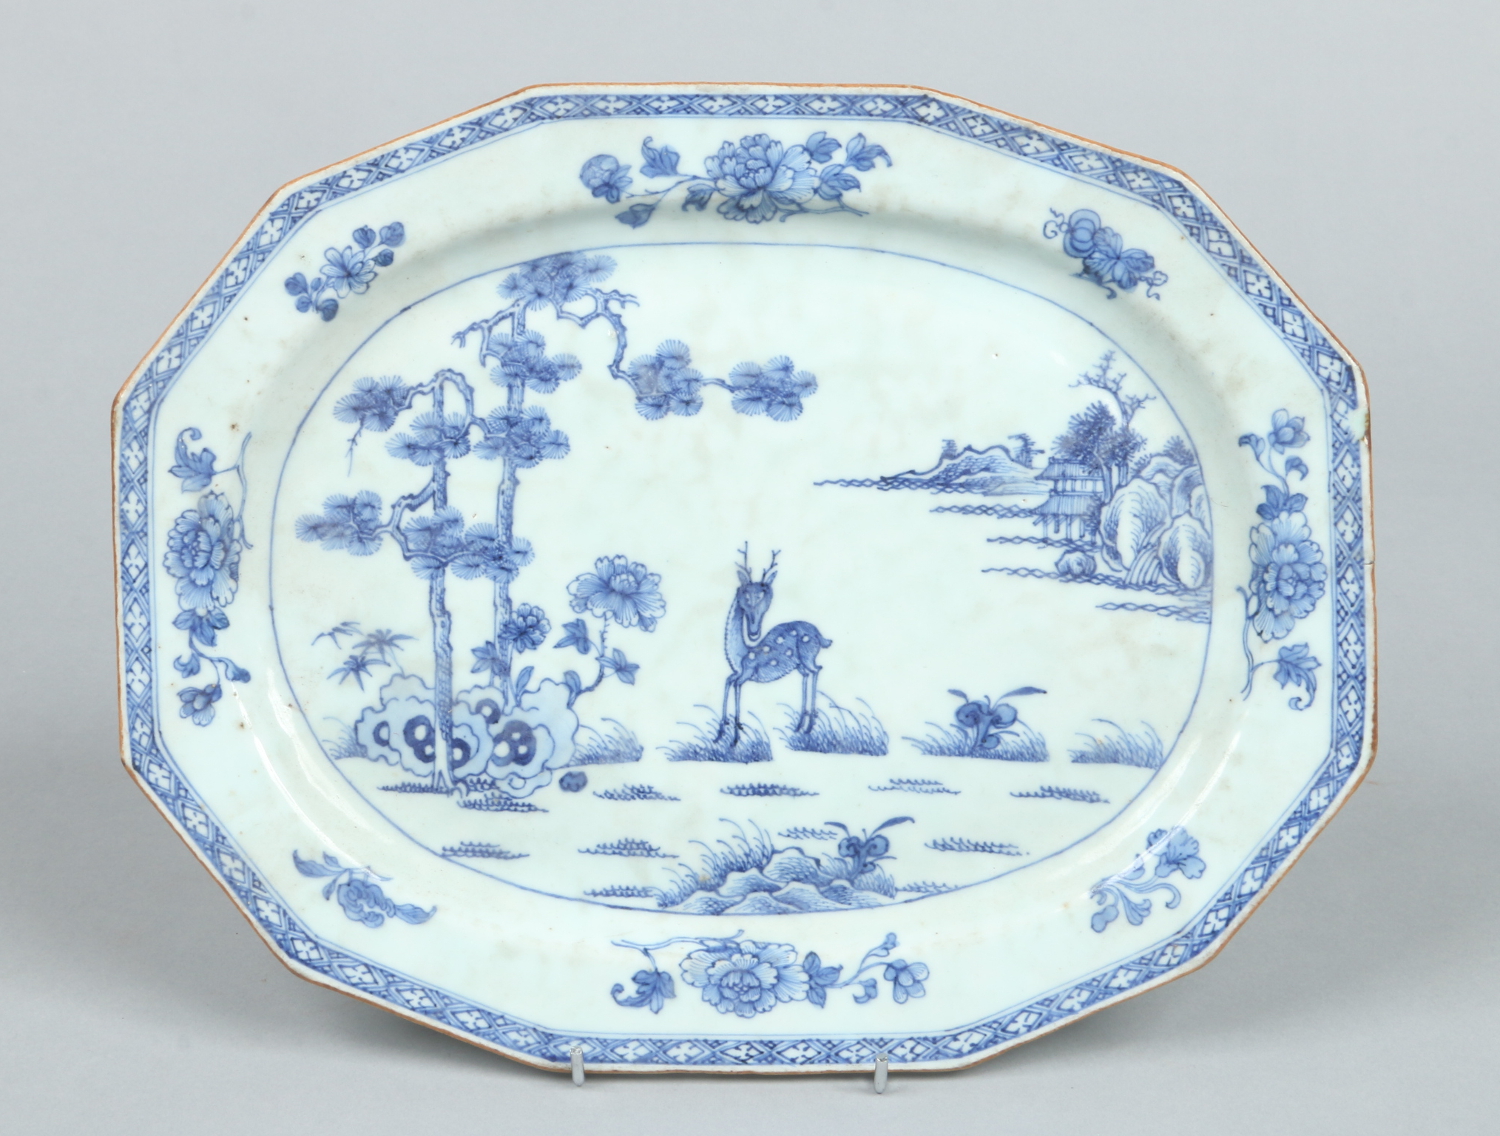 An 18th century Chinese export canted rectangular dish.